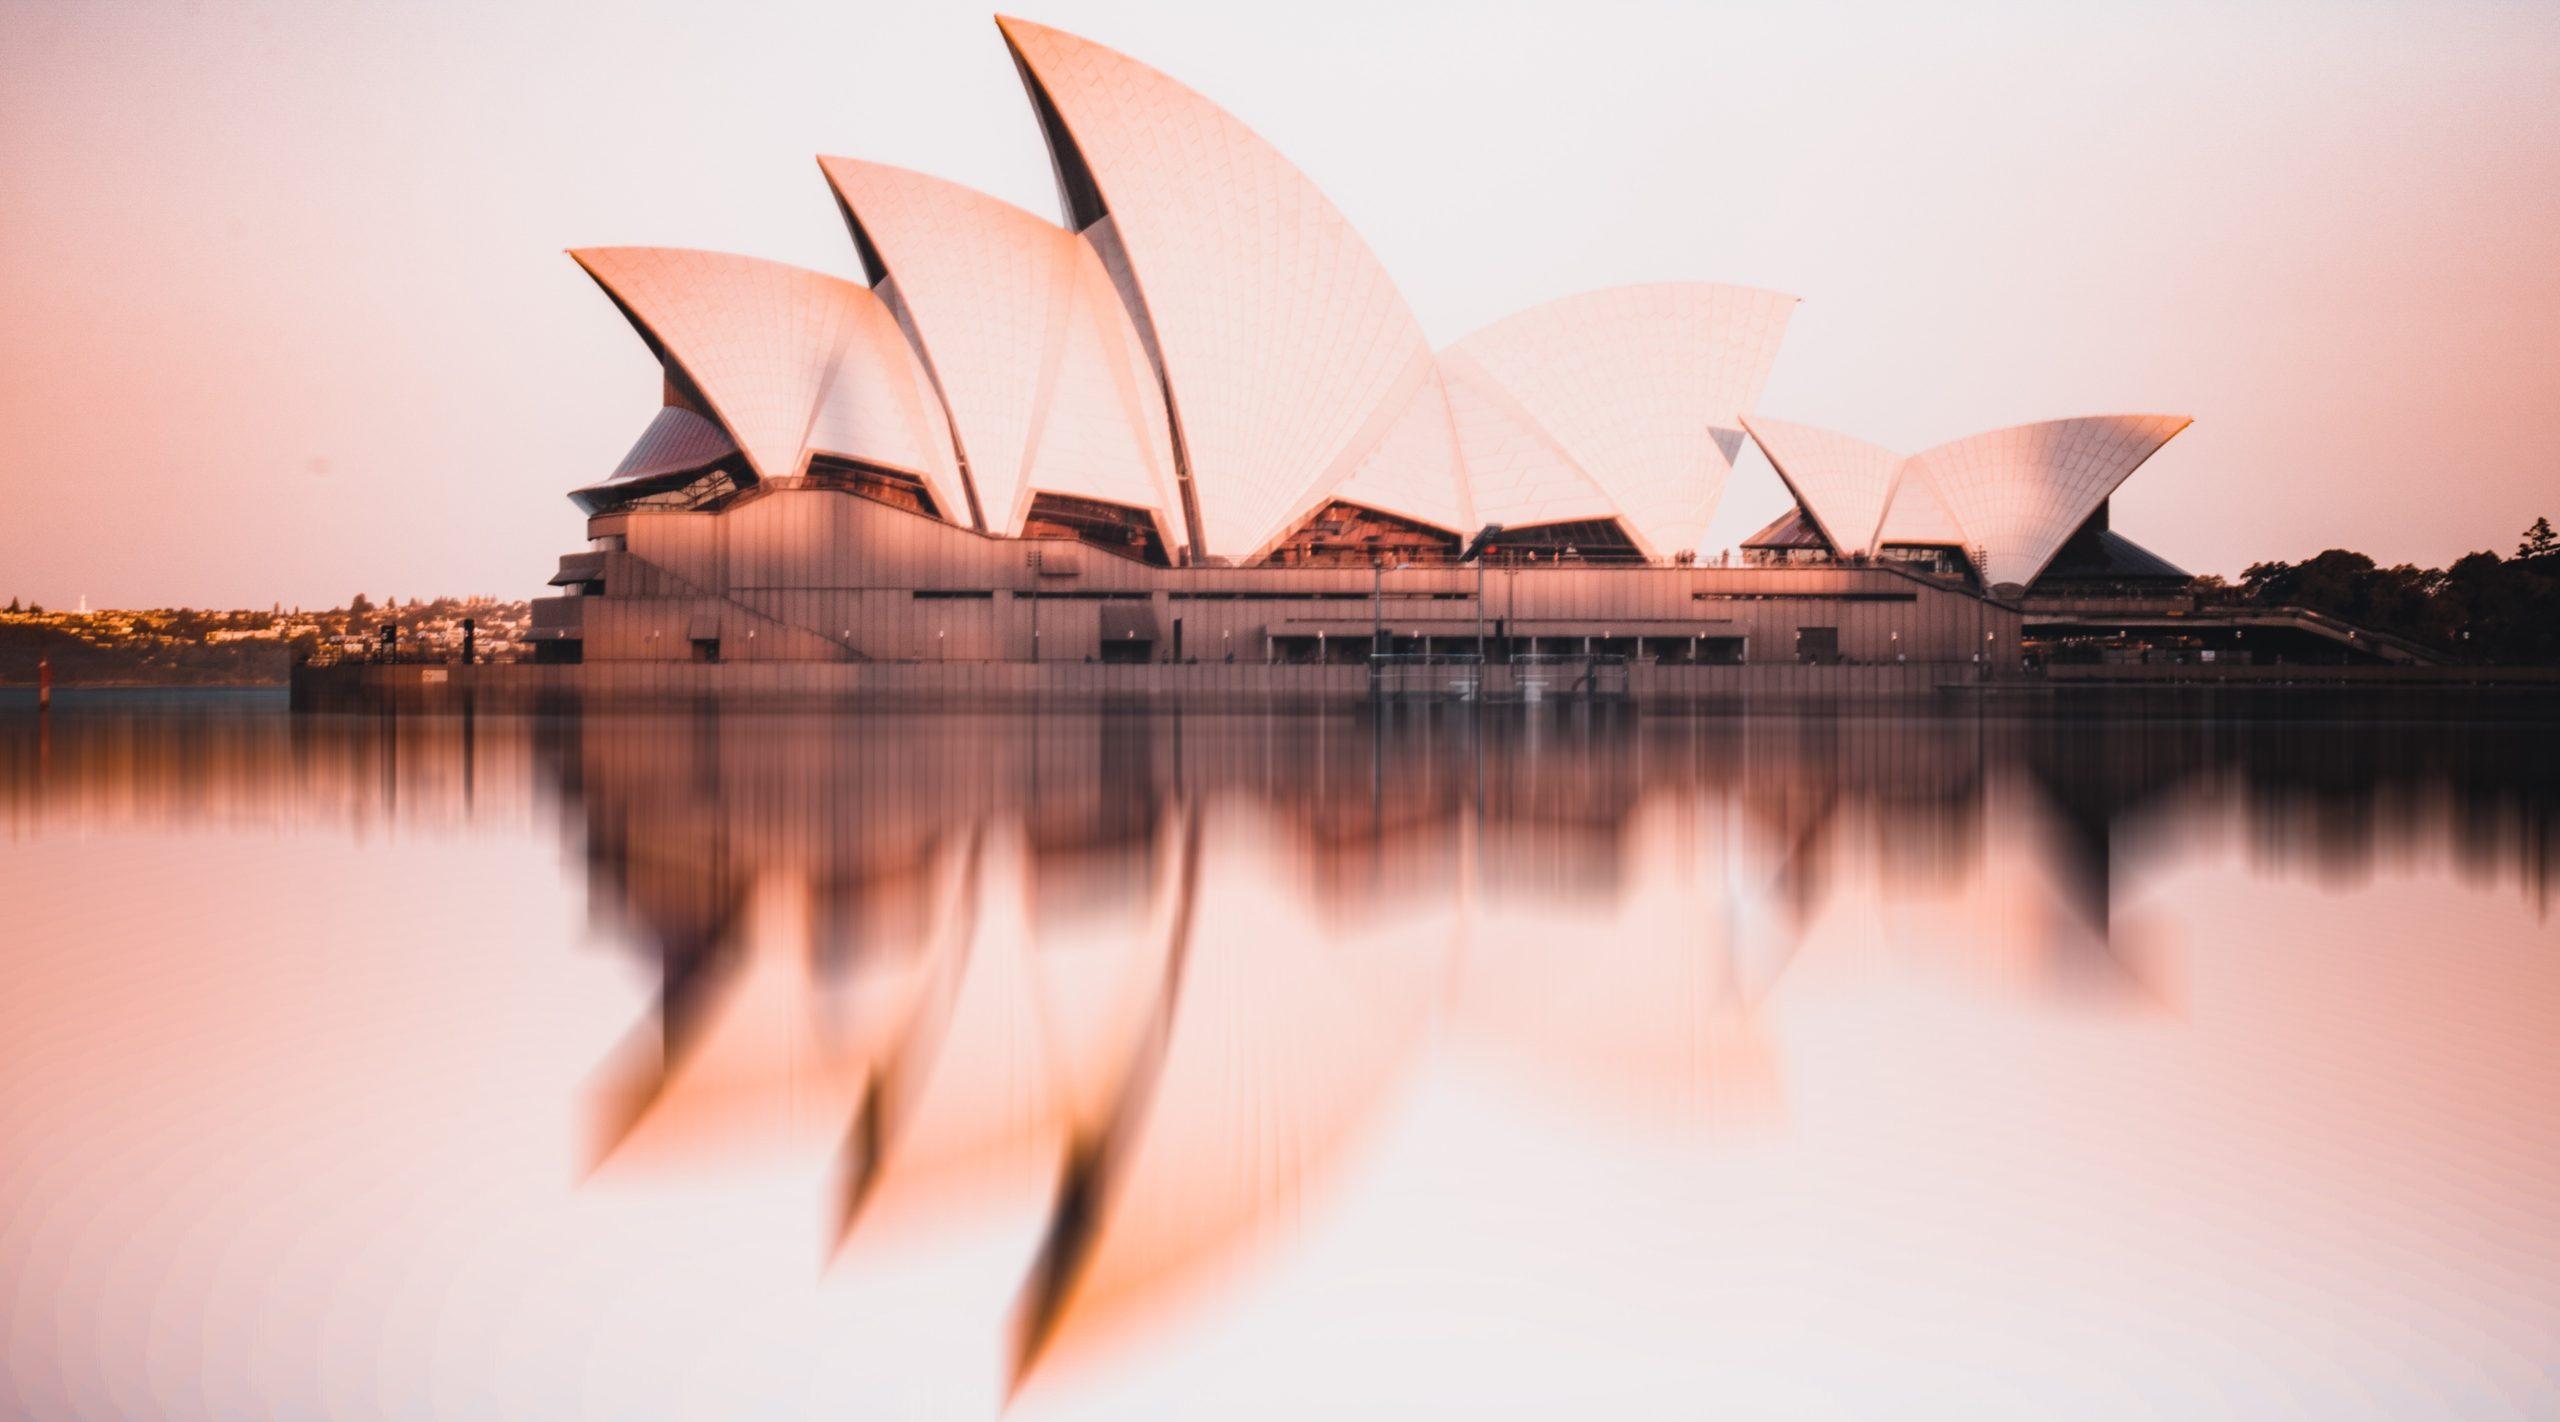 Sydney Opera House, including a reflection of the building on the water.